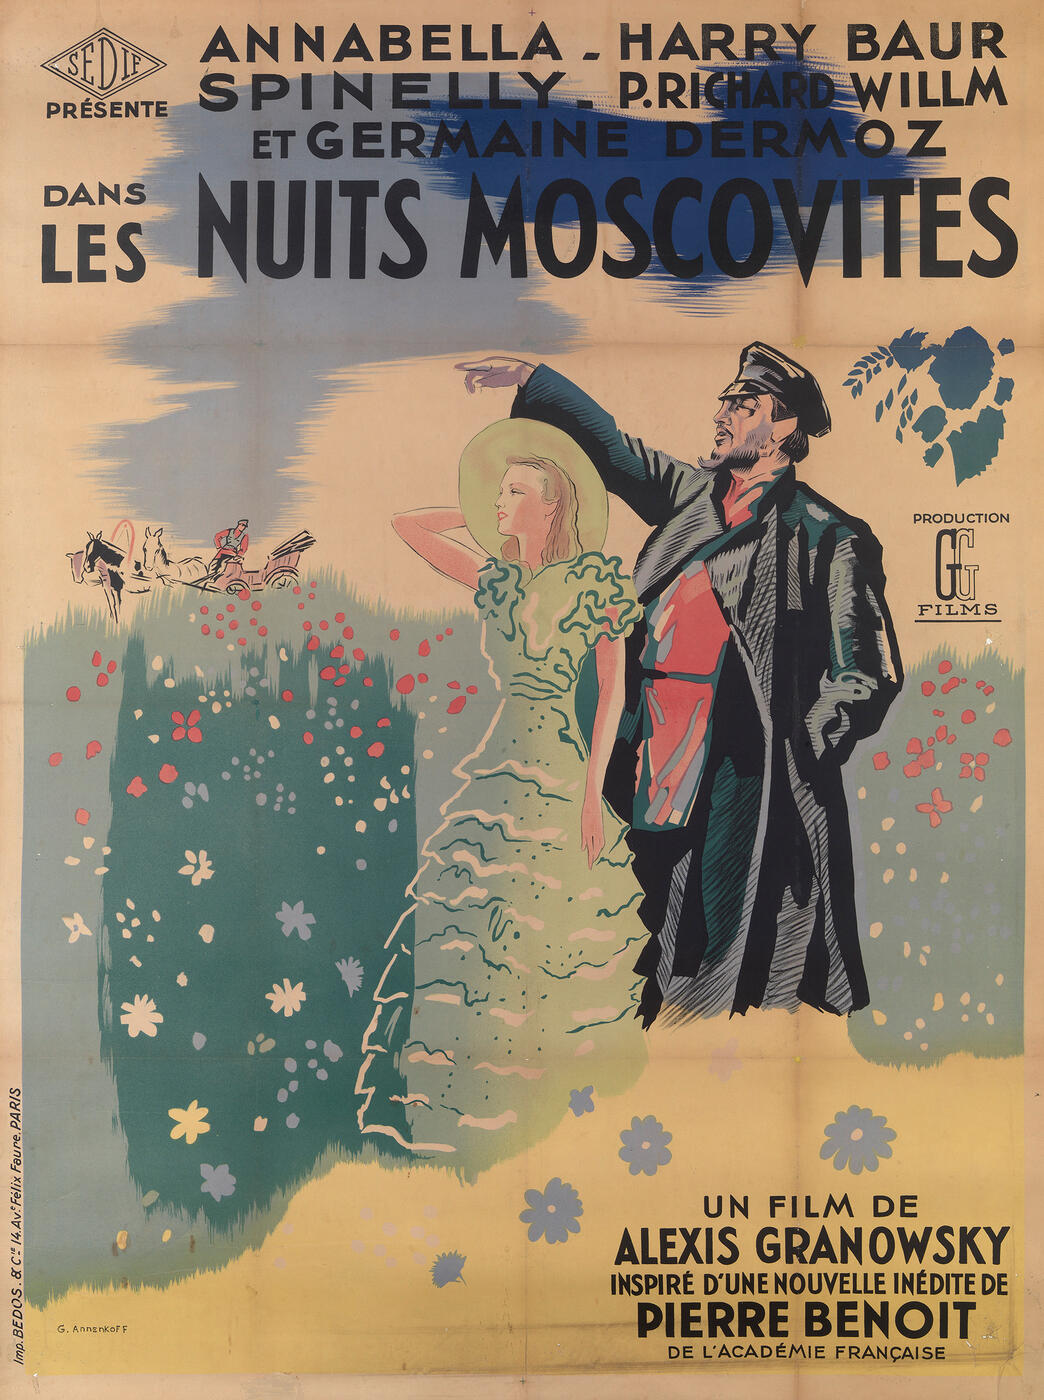 Poster for the A. Granowsky Film “Les nuits moscovites”